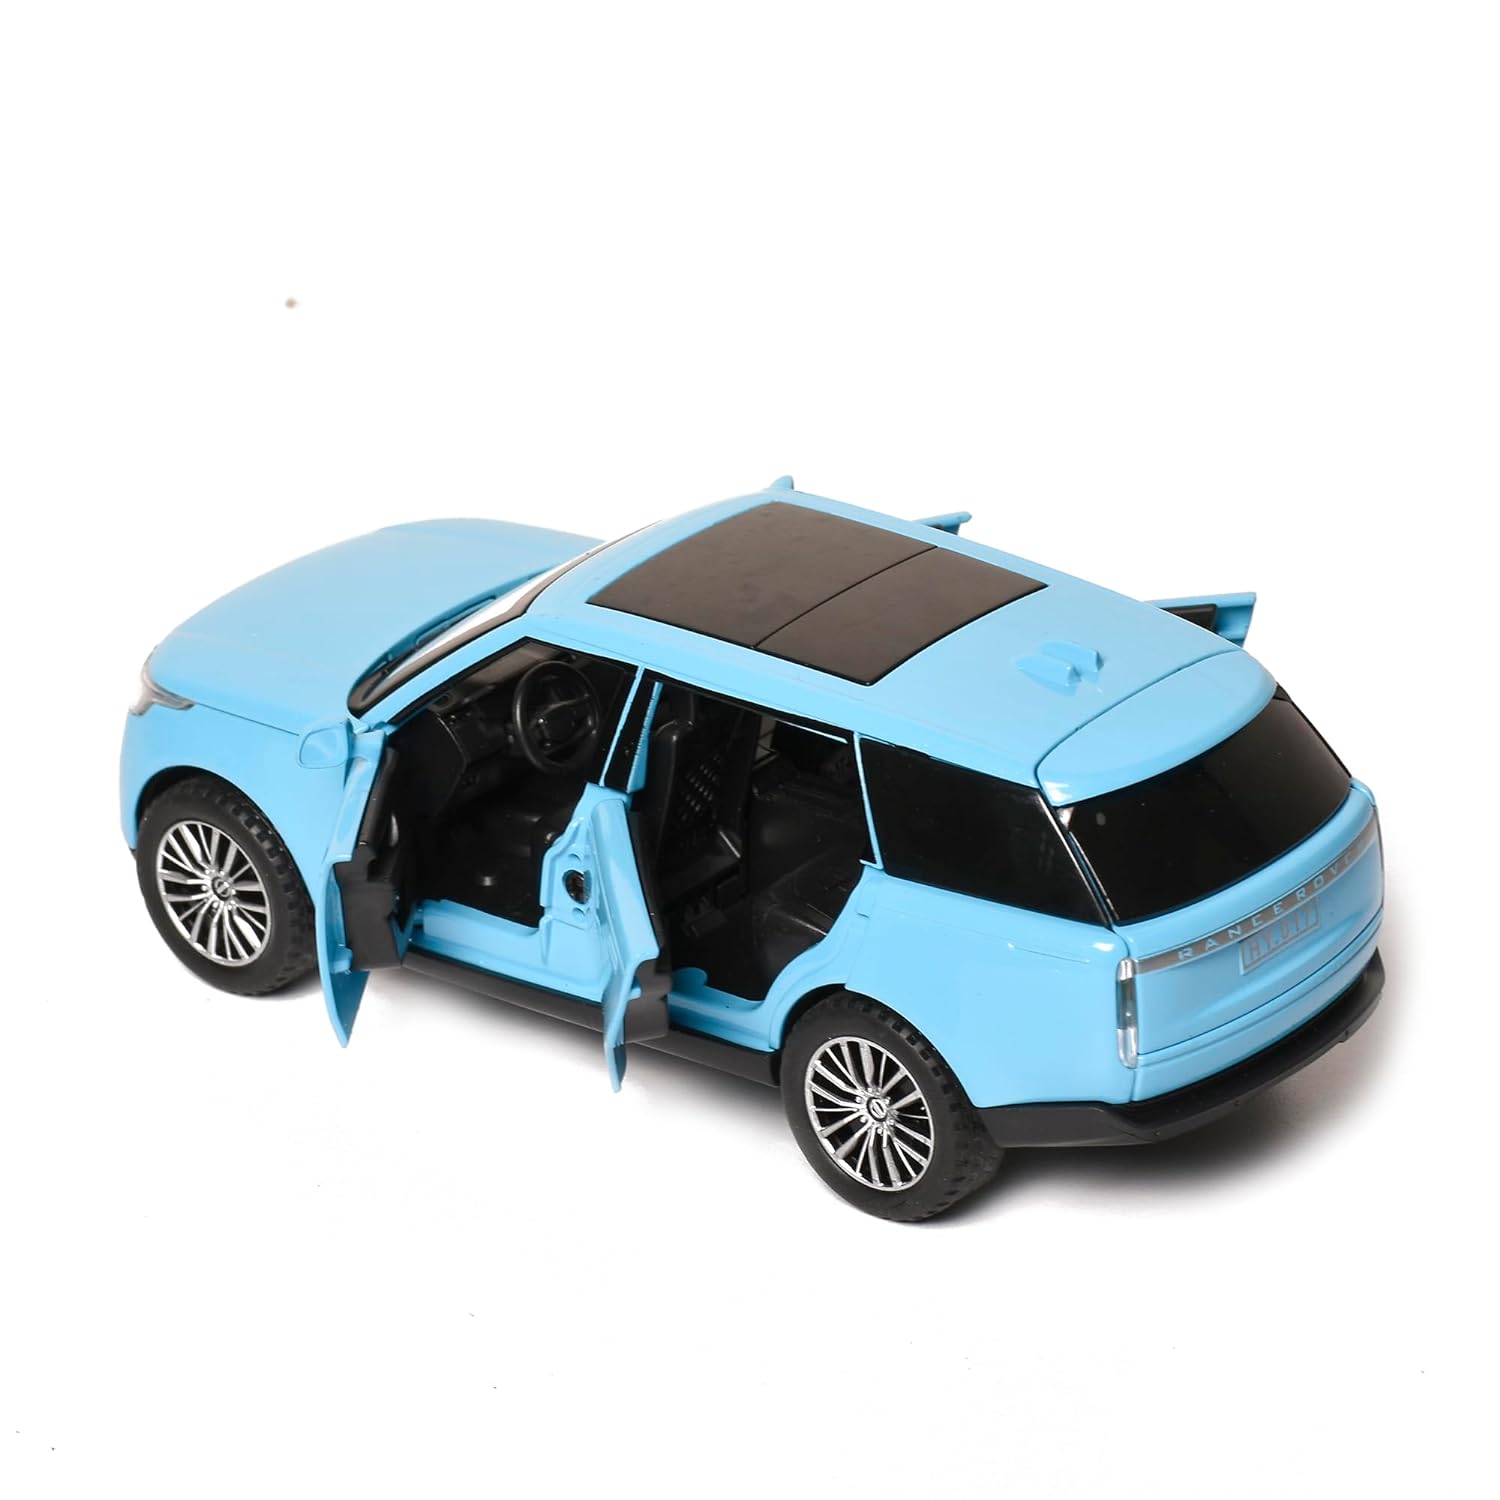 Braintastic Model Diecast Car Toy Vehicle Pull Back Friction Car with Openable Doors Light & Music Toys for Kids Age 3+ Years (AK Metal Series Range Rover Blue)